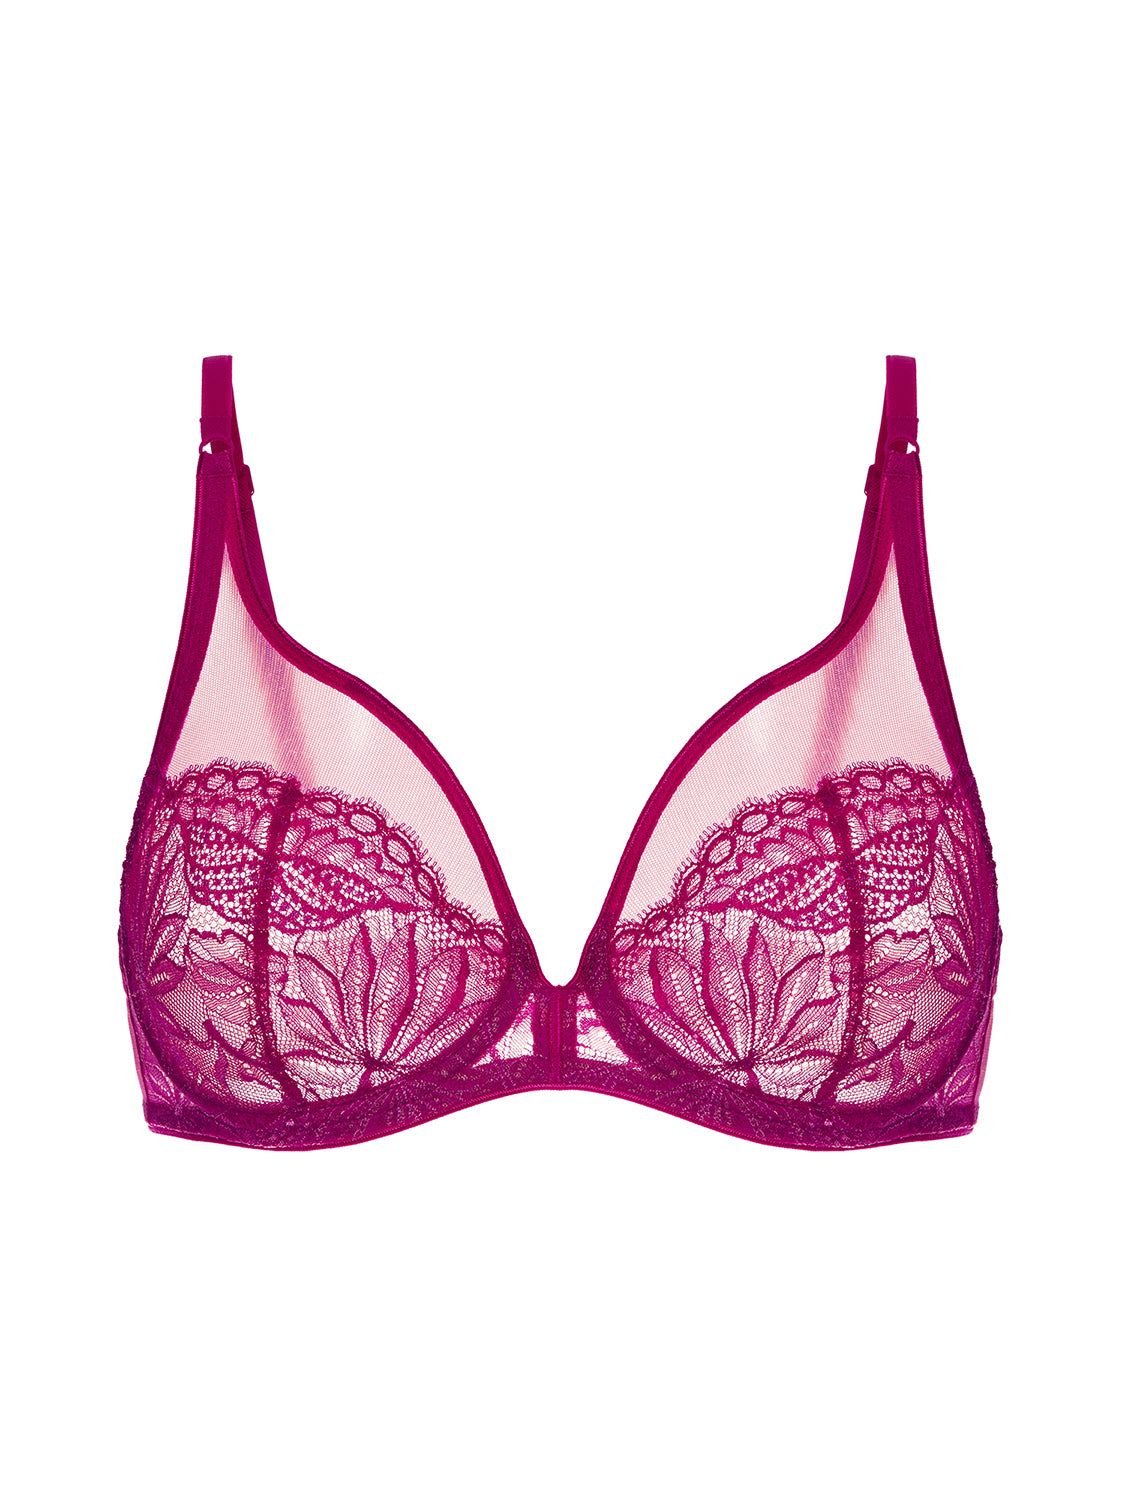 Soutiens-gorge Triangle, Embody Lingerie